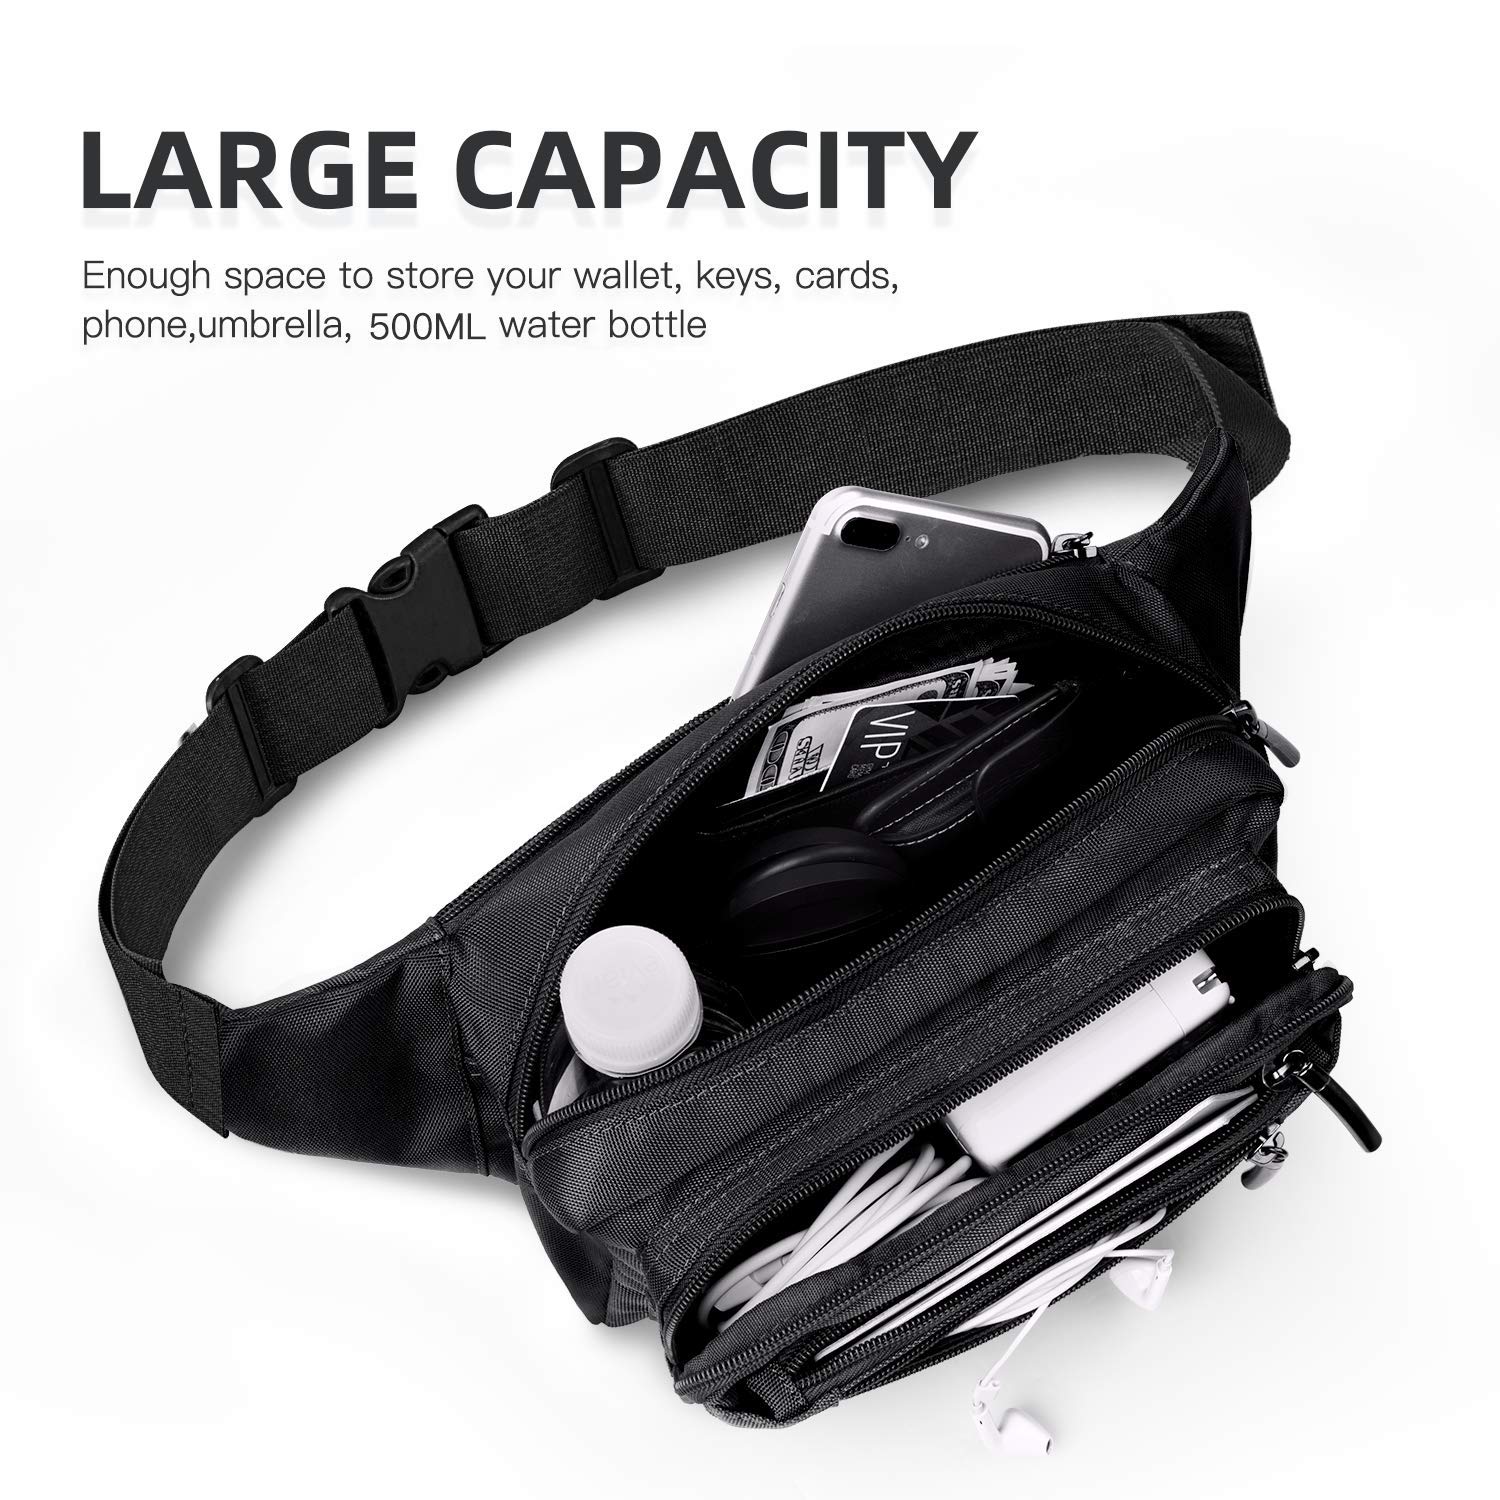 FREETOO Waist Pack Bag Fanny Pack for Men&Women Hip Bum Bag with Adjustable Strap for Outdoors Workout Traveling Casual Running Hiking Cycling